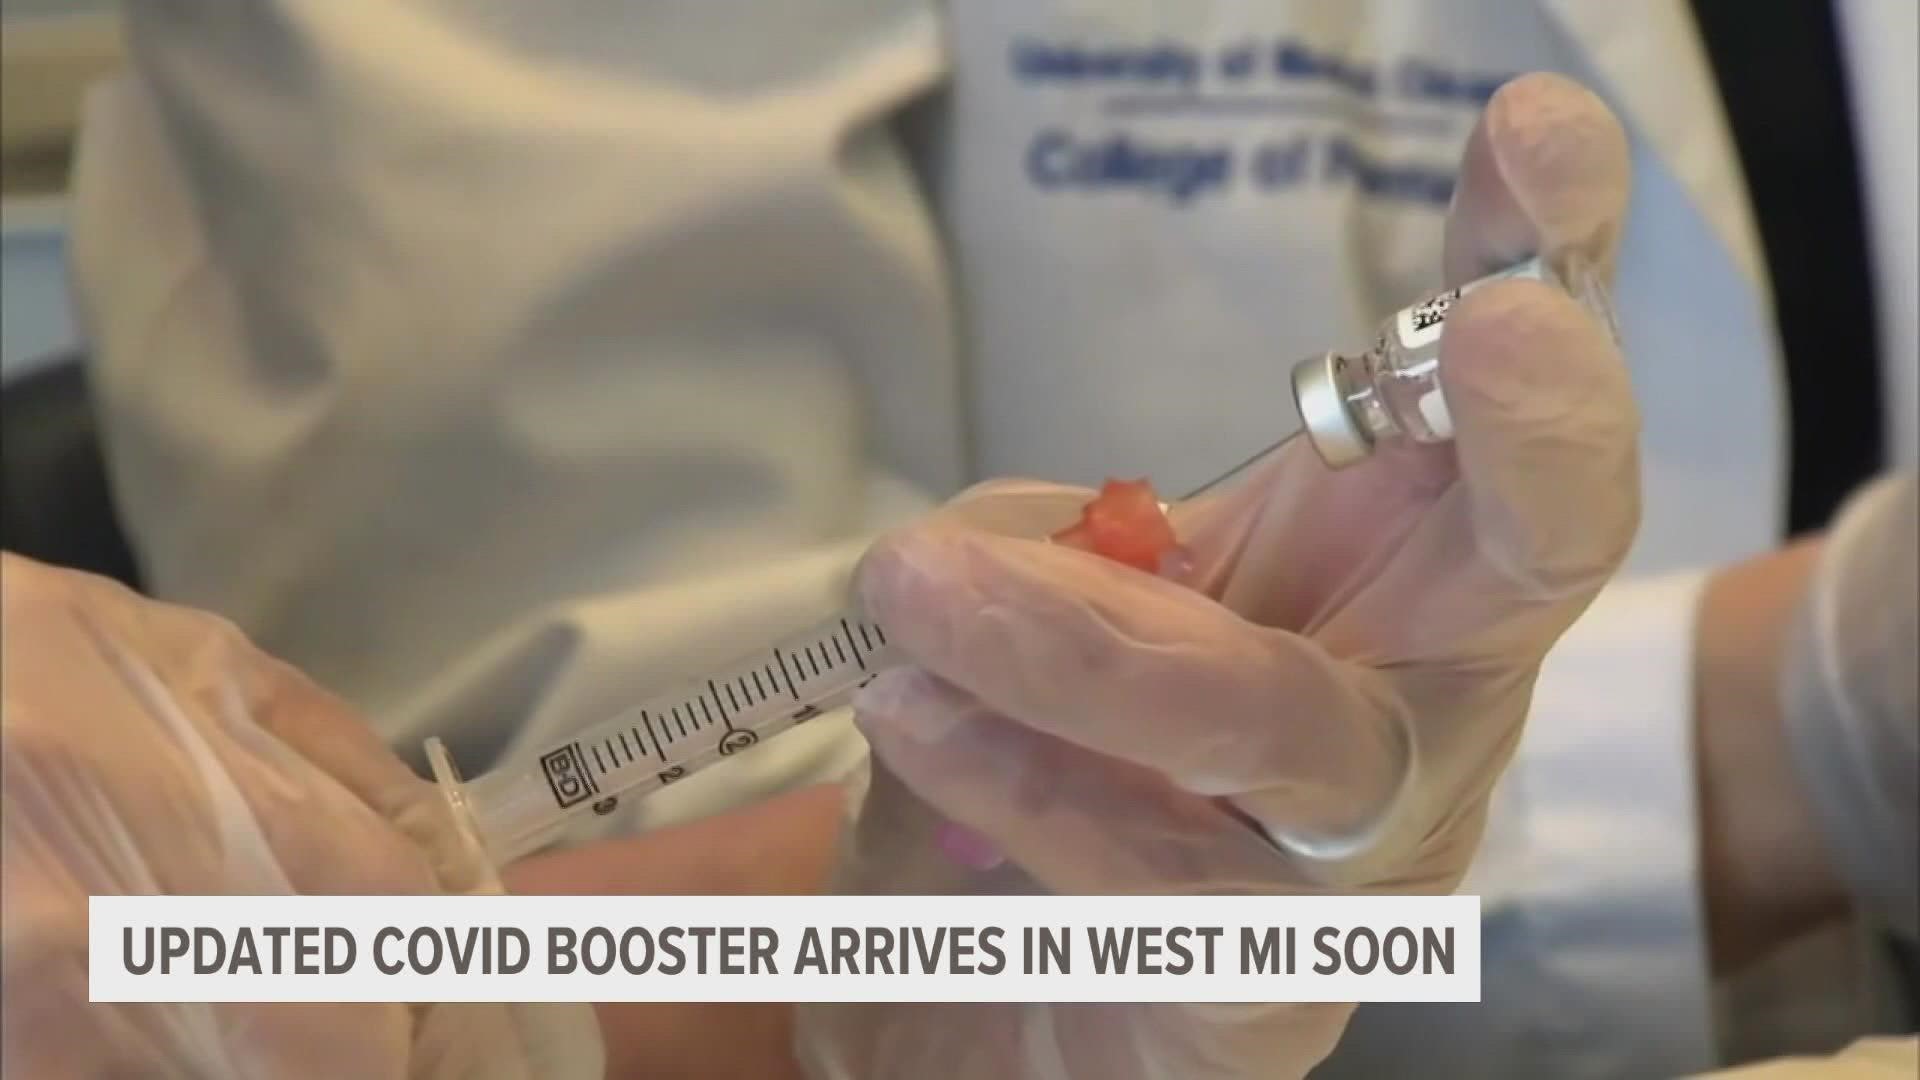 Kent and Ottawa counties have placed their orders for the vaccine doses, awaiting arrival likely sometime this week.